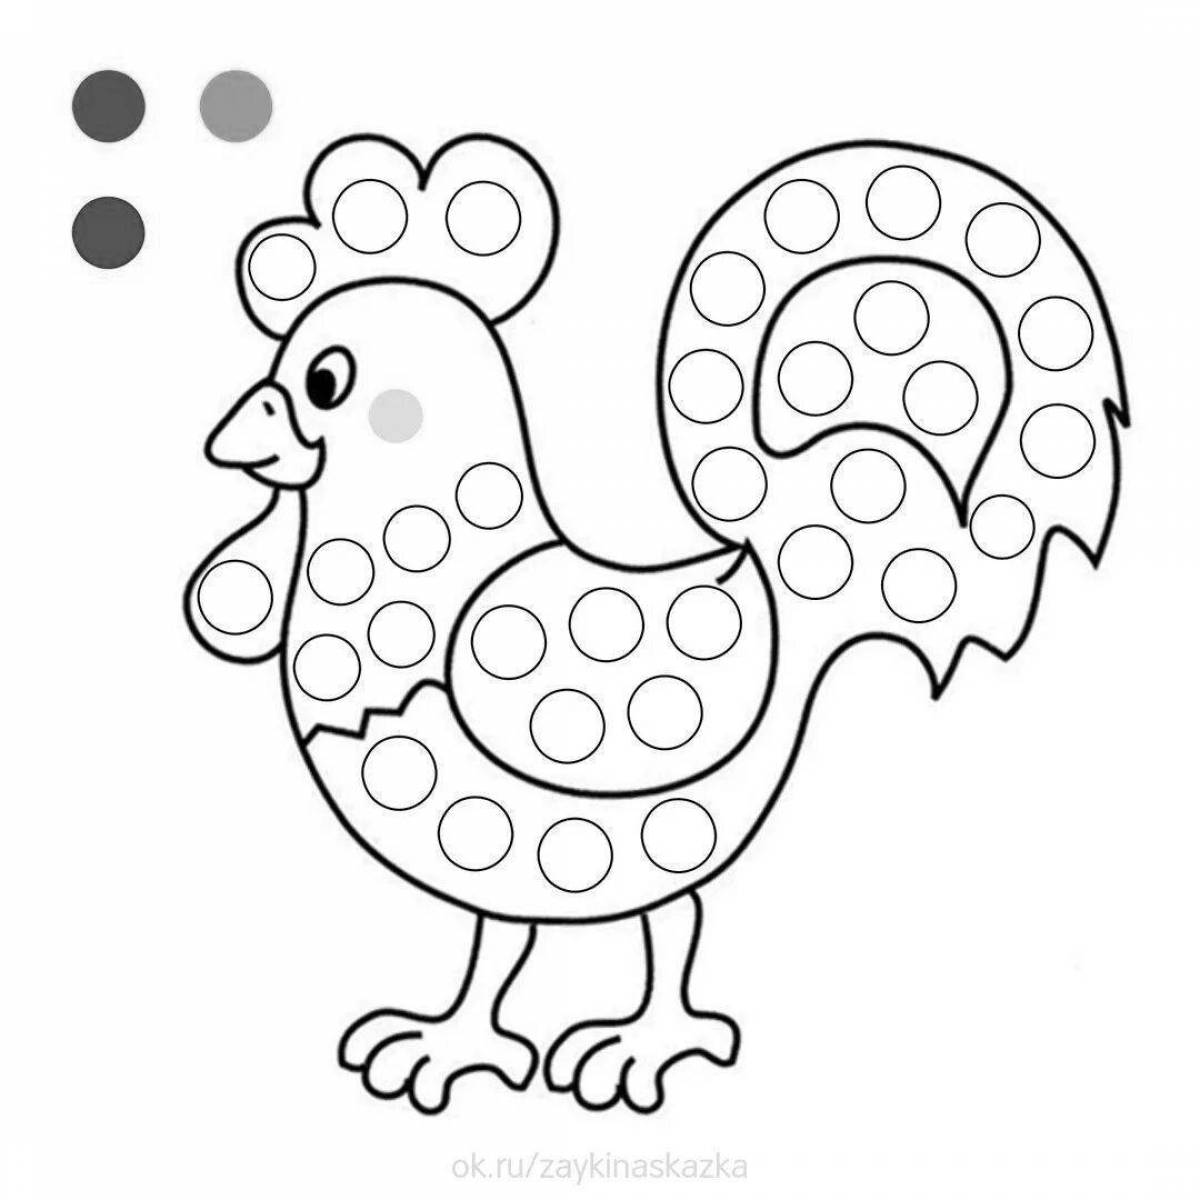 Colourful coloring pages for adults